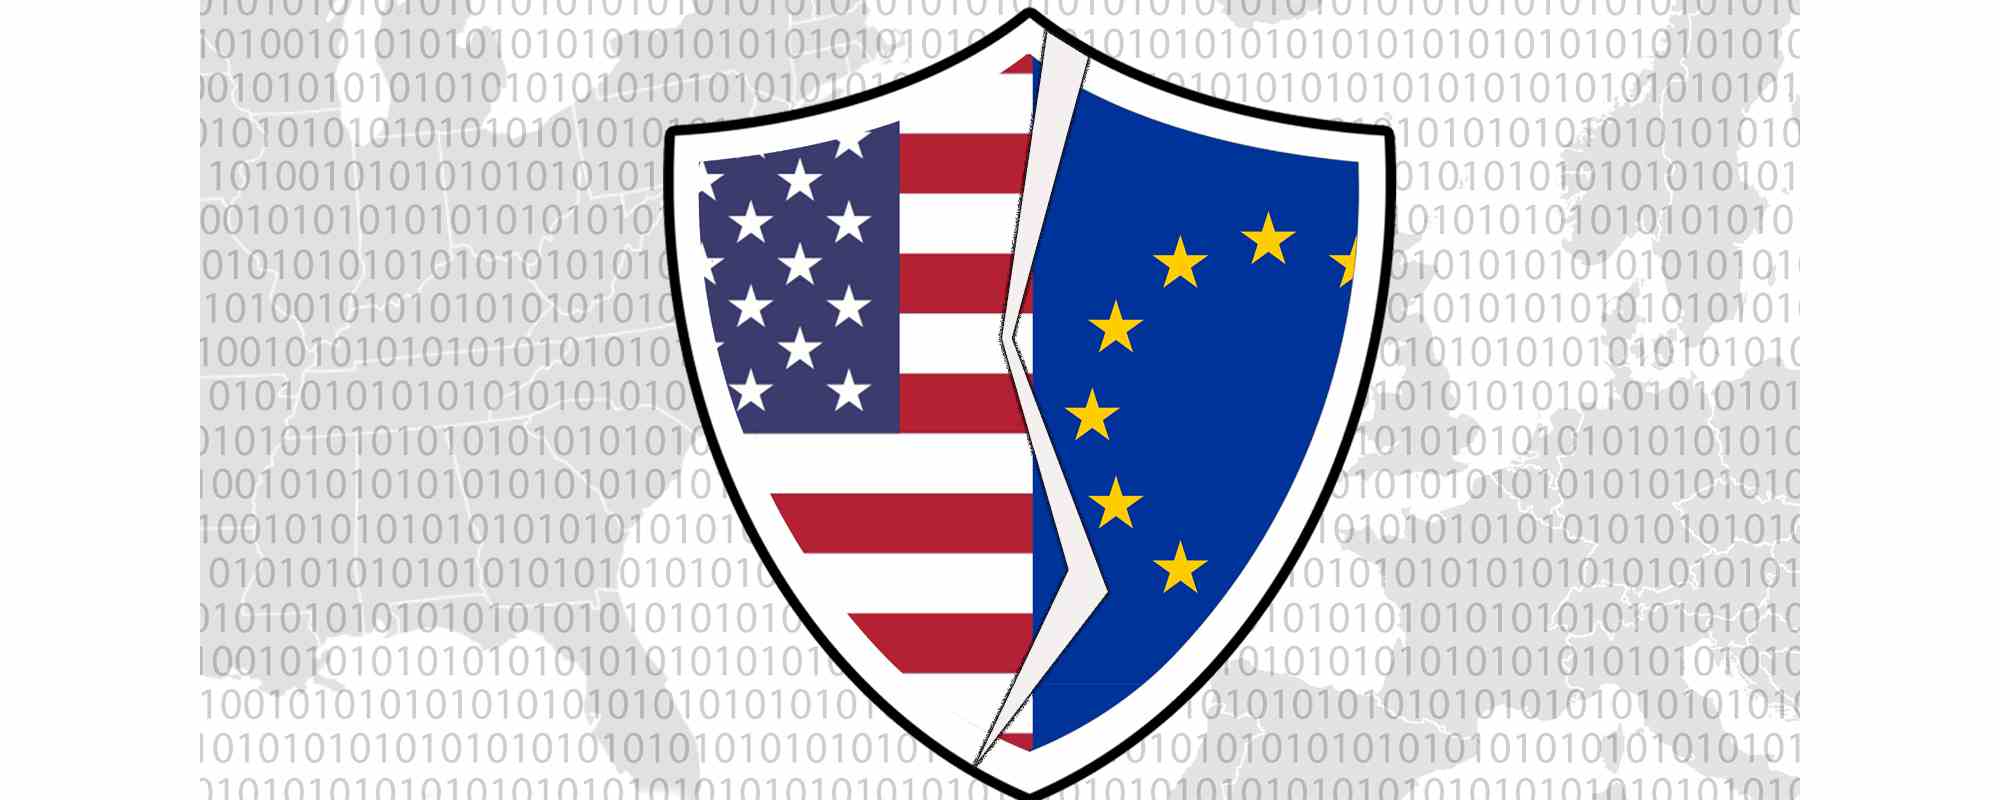 Image of a broken shield with images of the US and EU flags on a binary geographical backdrop depicting the broken privacy shield agreement